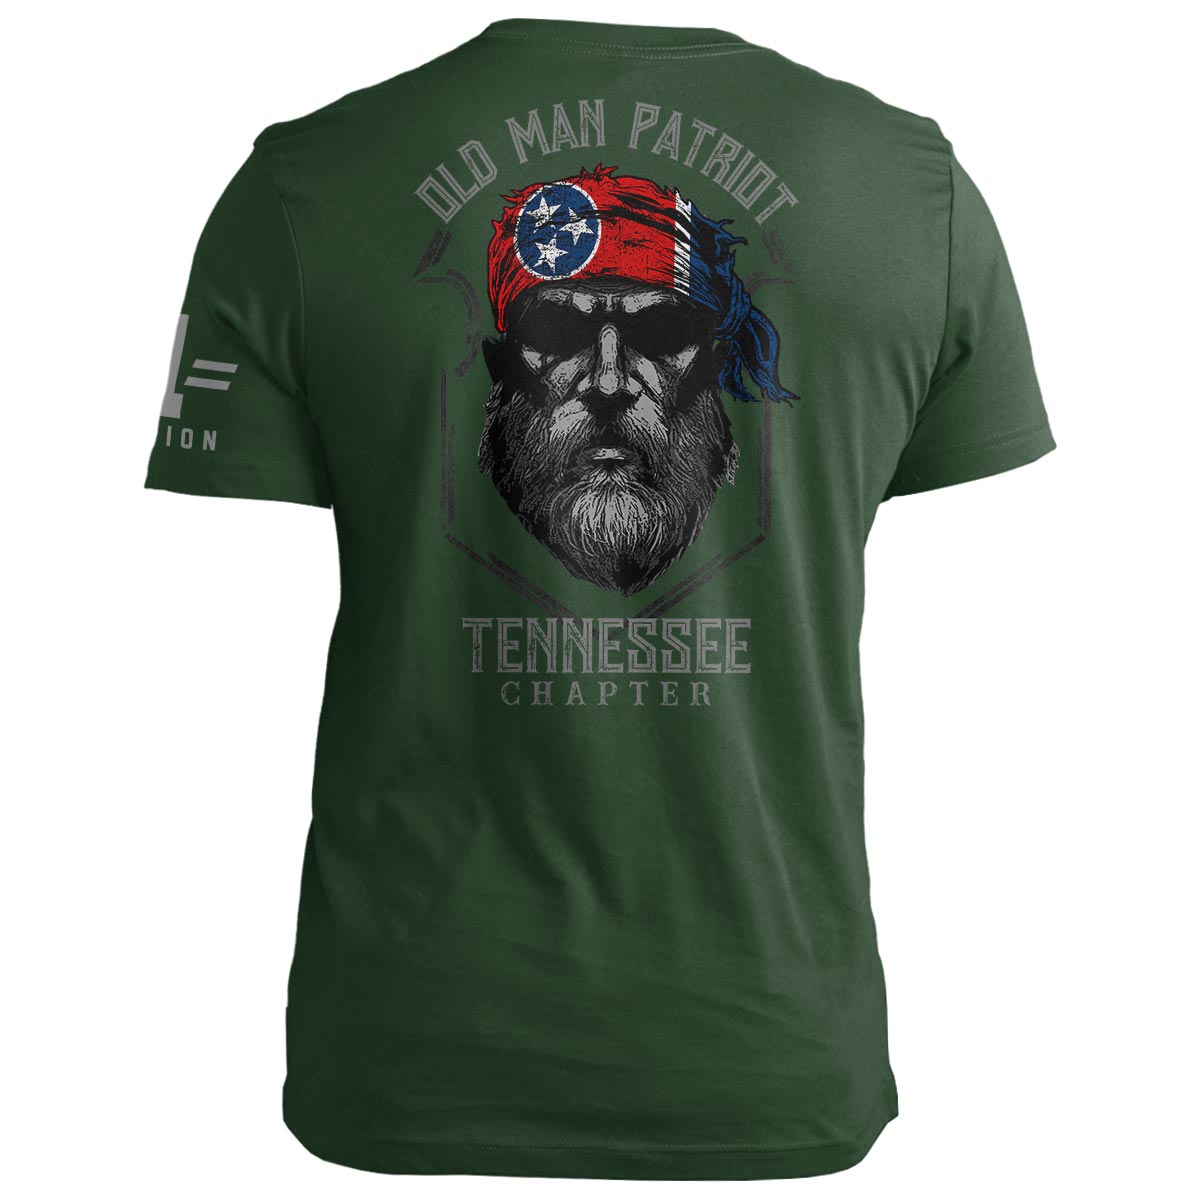 Tennessee Old Man Patriot